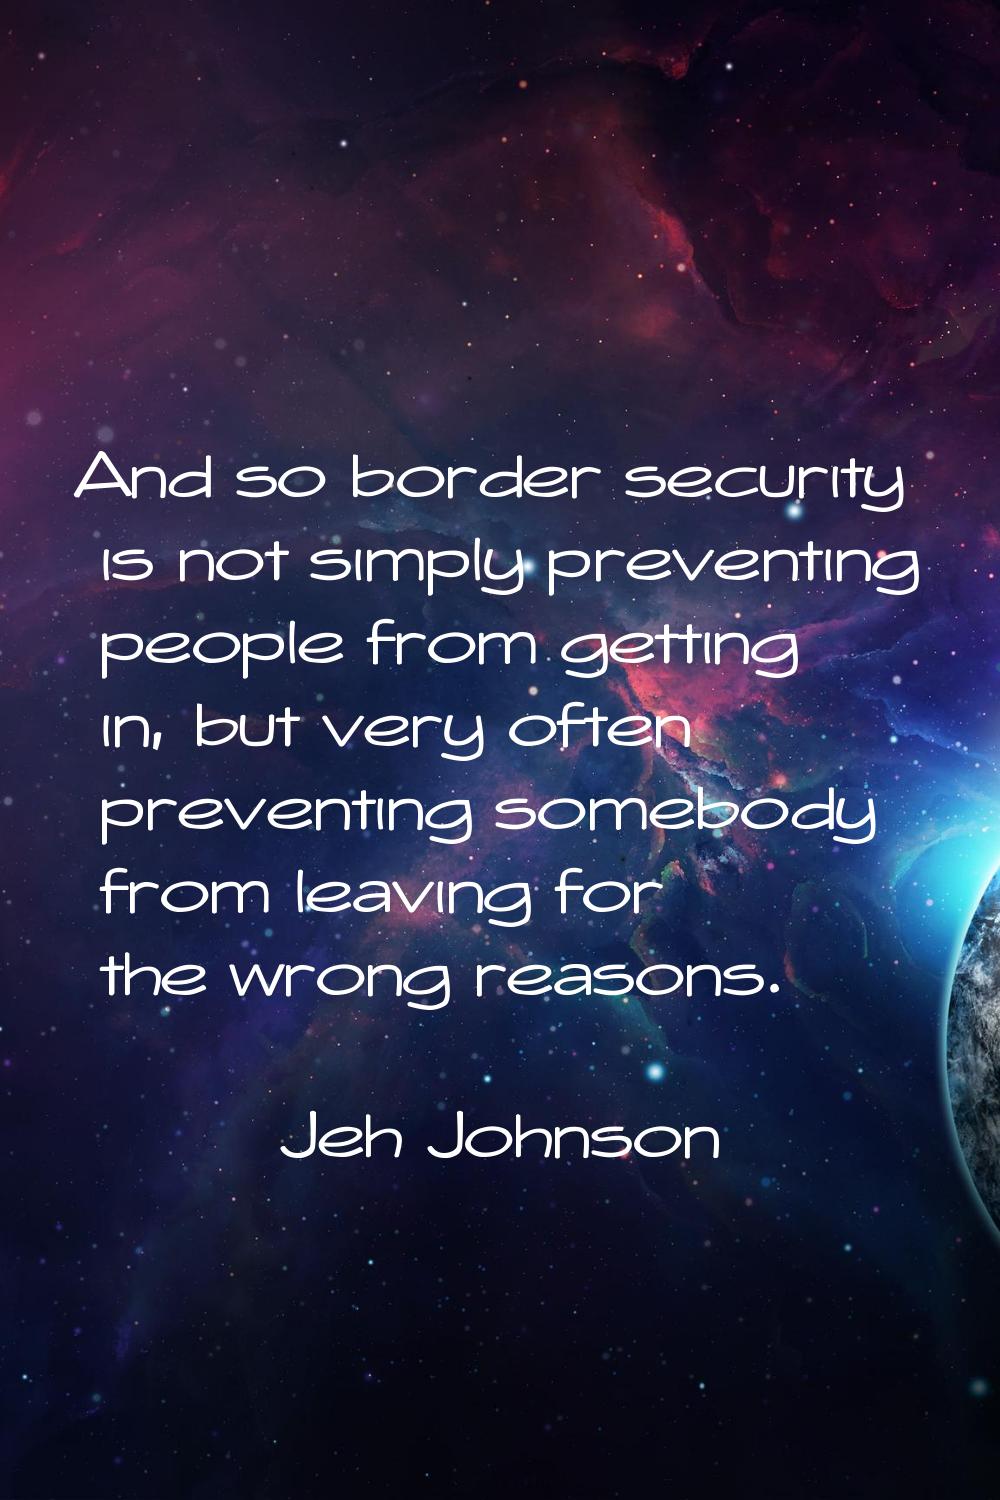 And so border security is not simply preventing people from getting in, but very often preventing s